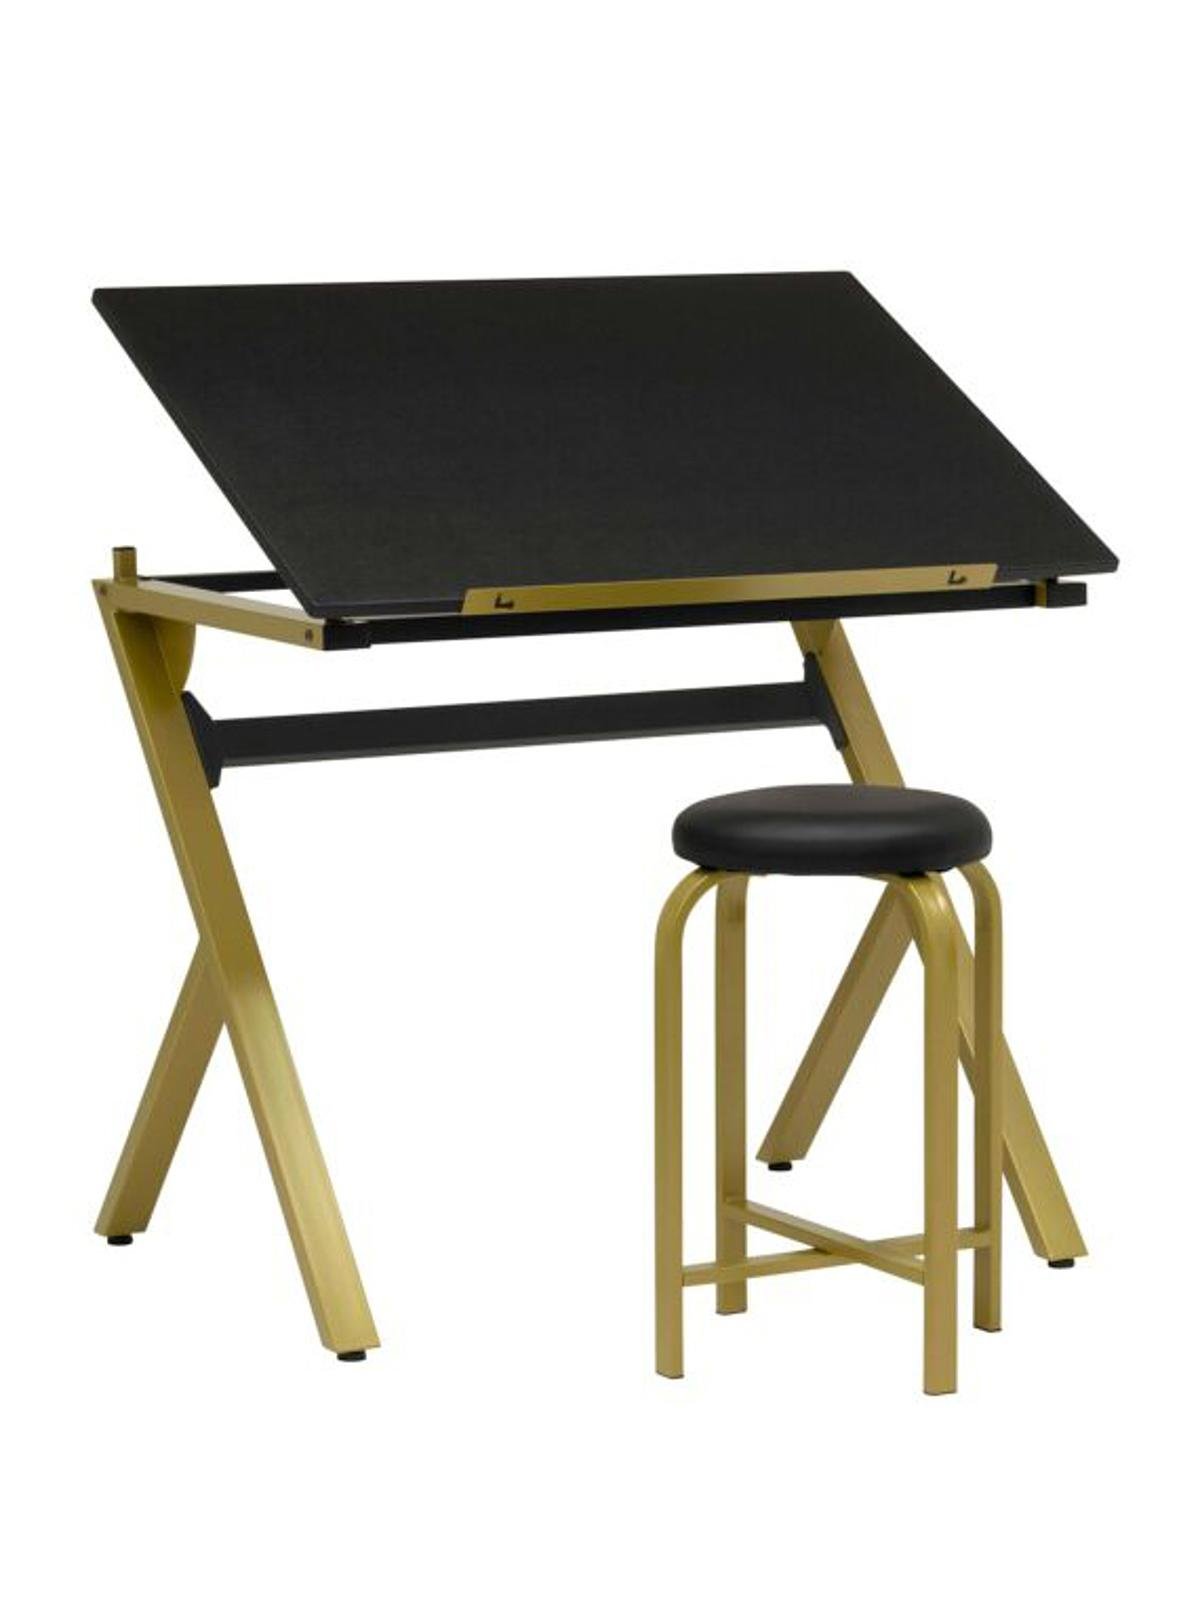 Where to Buy Affordable Craft Tables